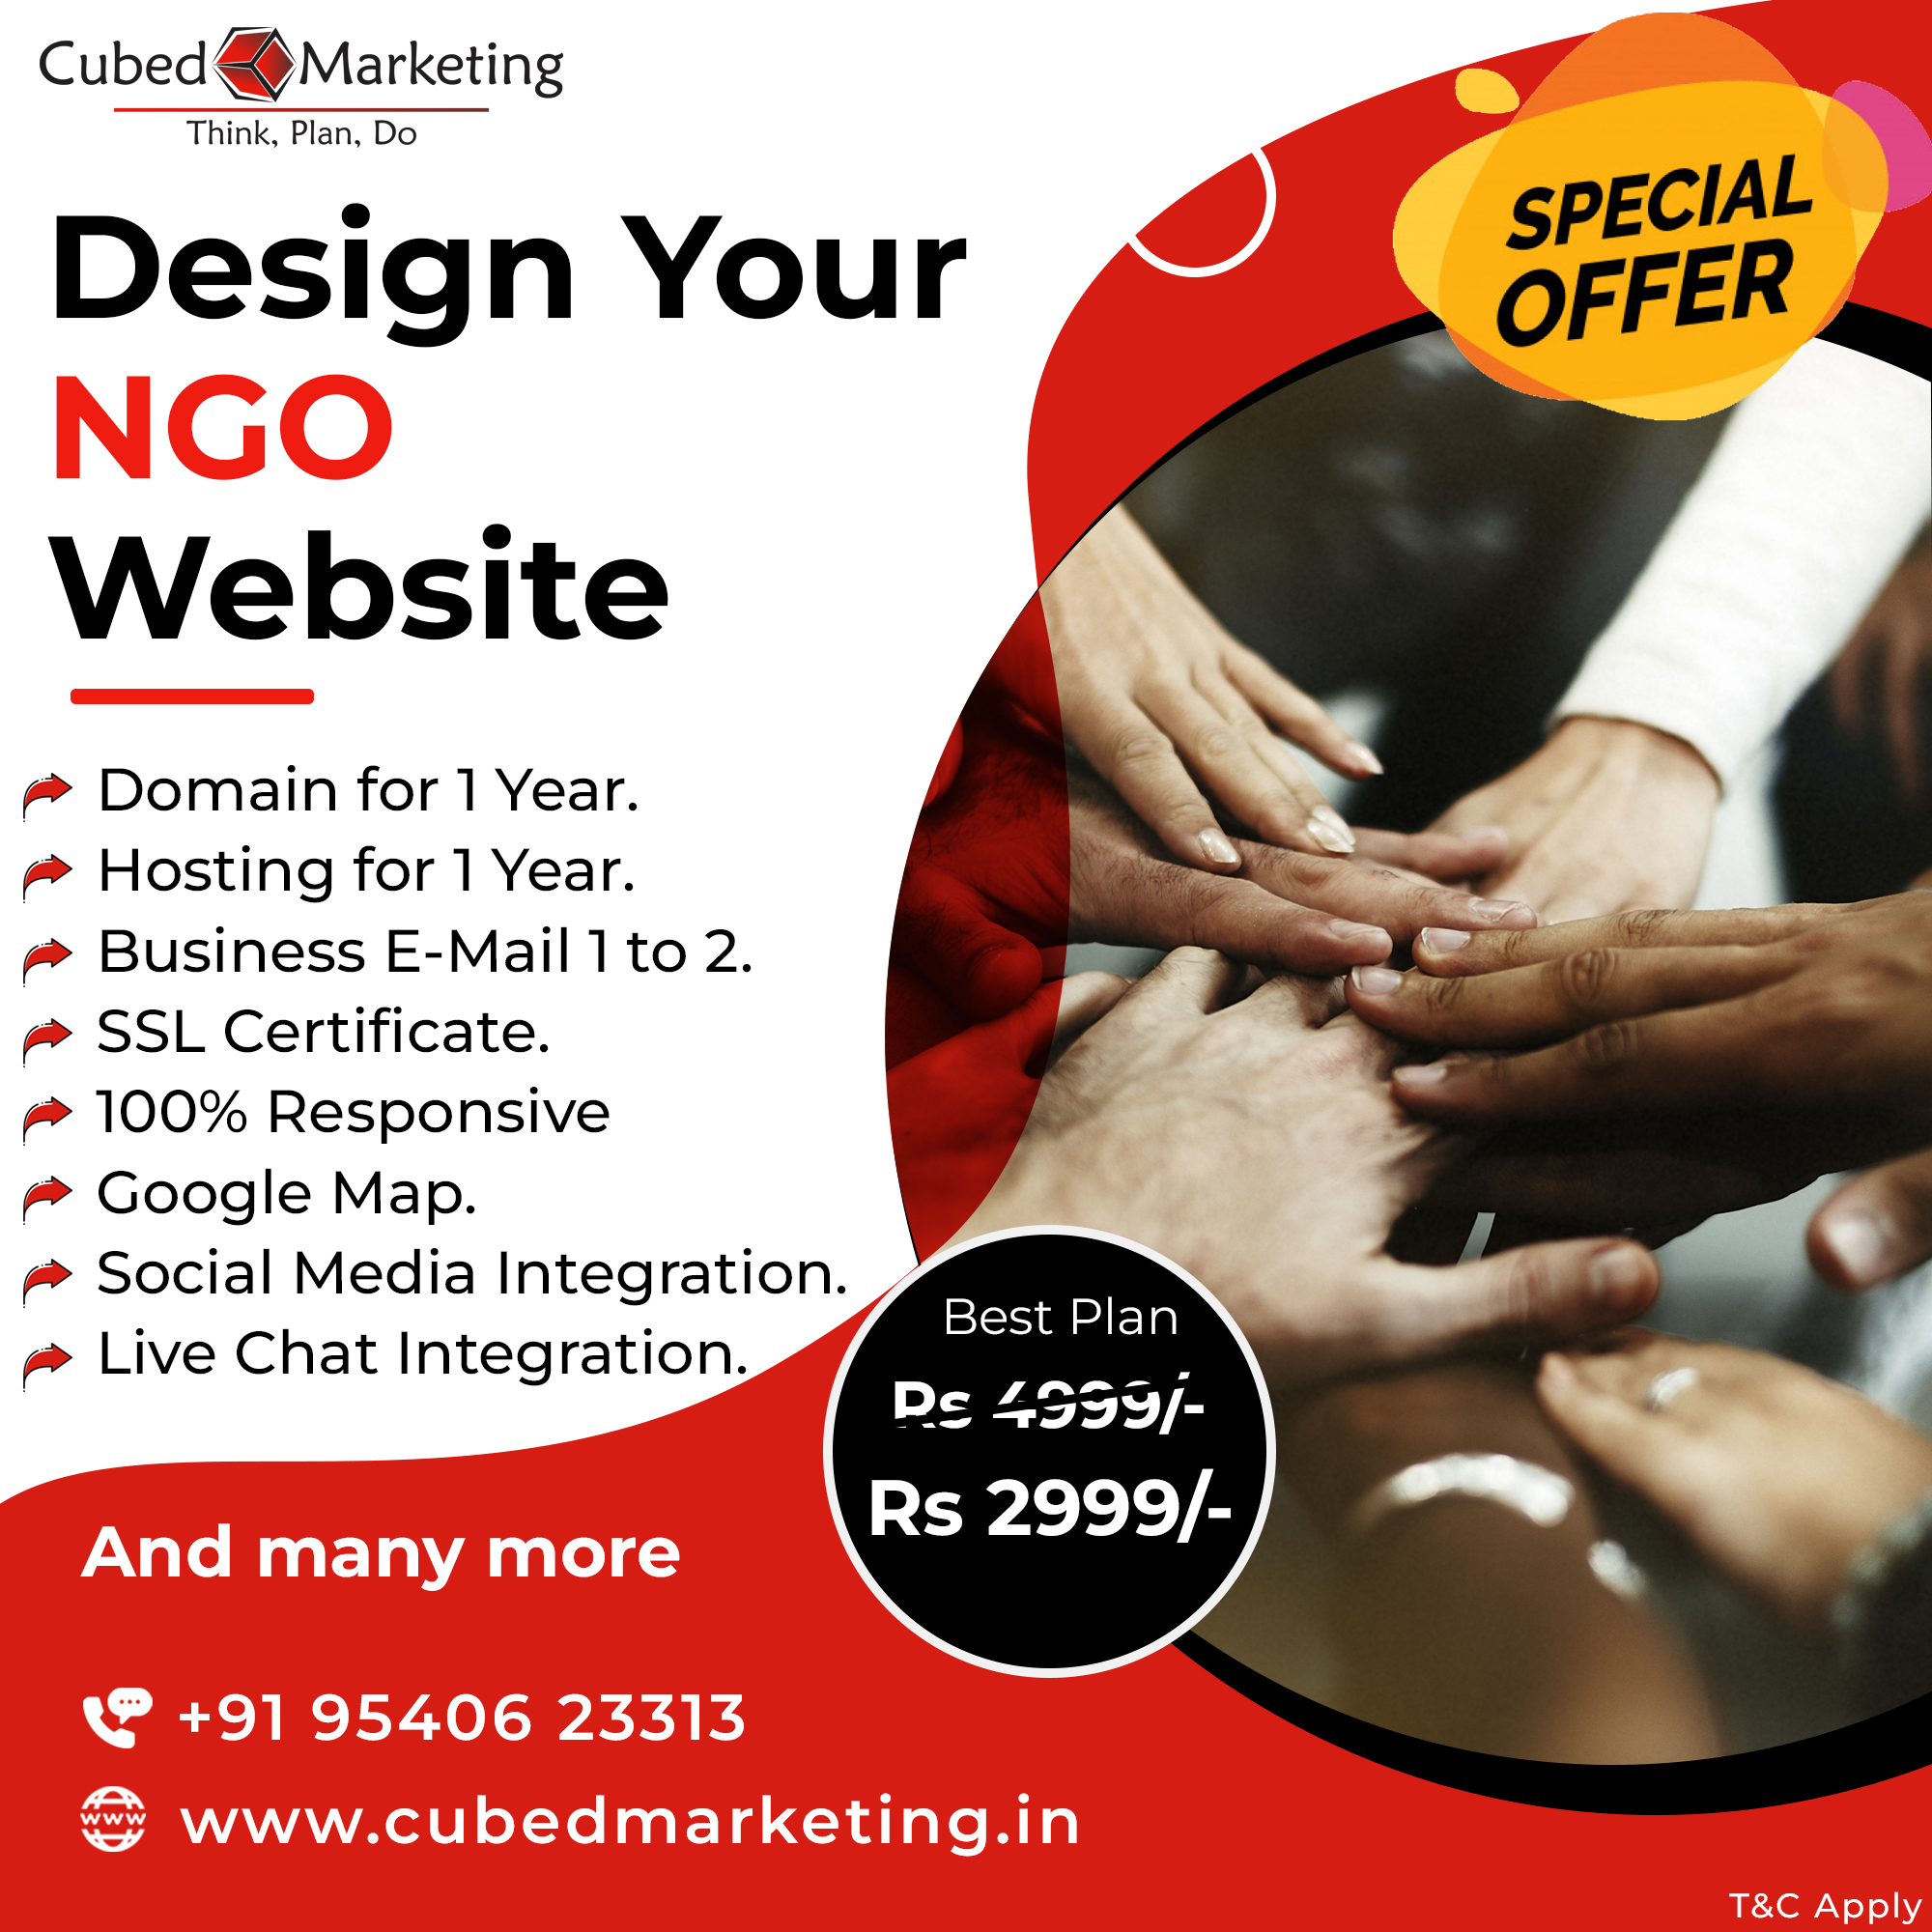 You are currently viewing Design Your NGO Website.